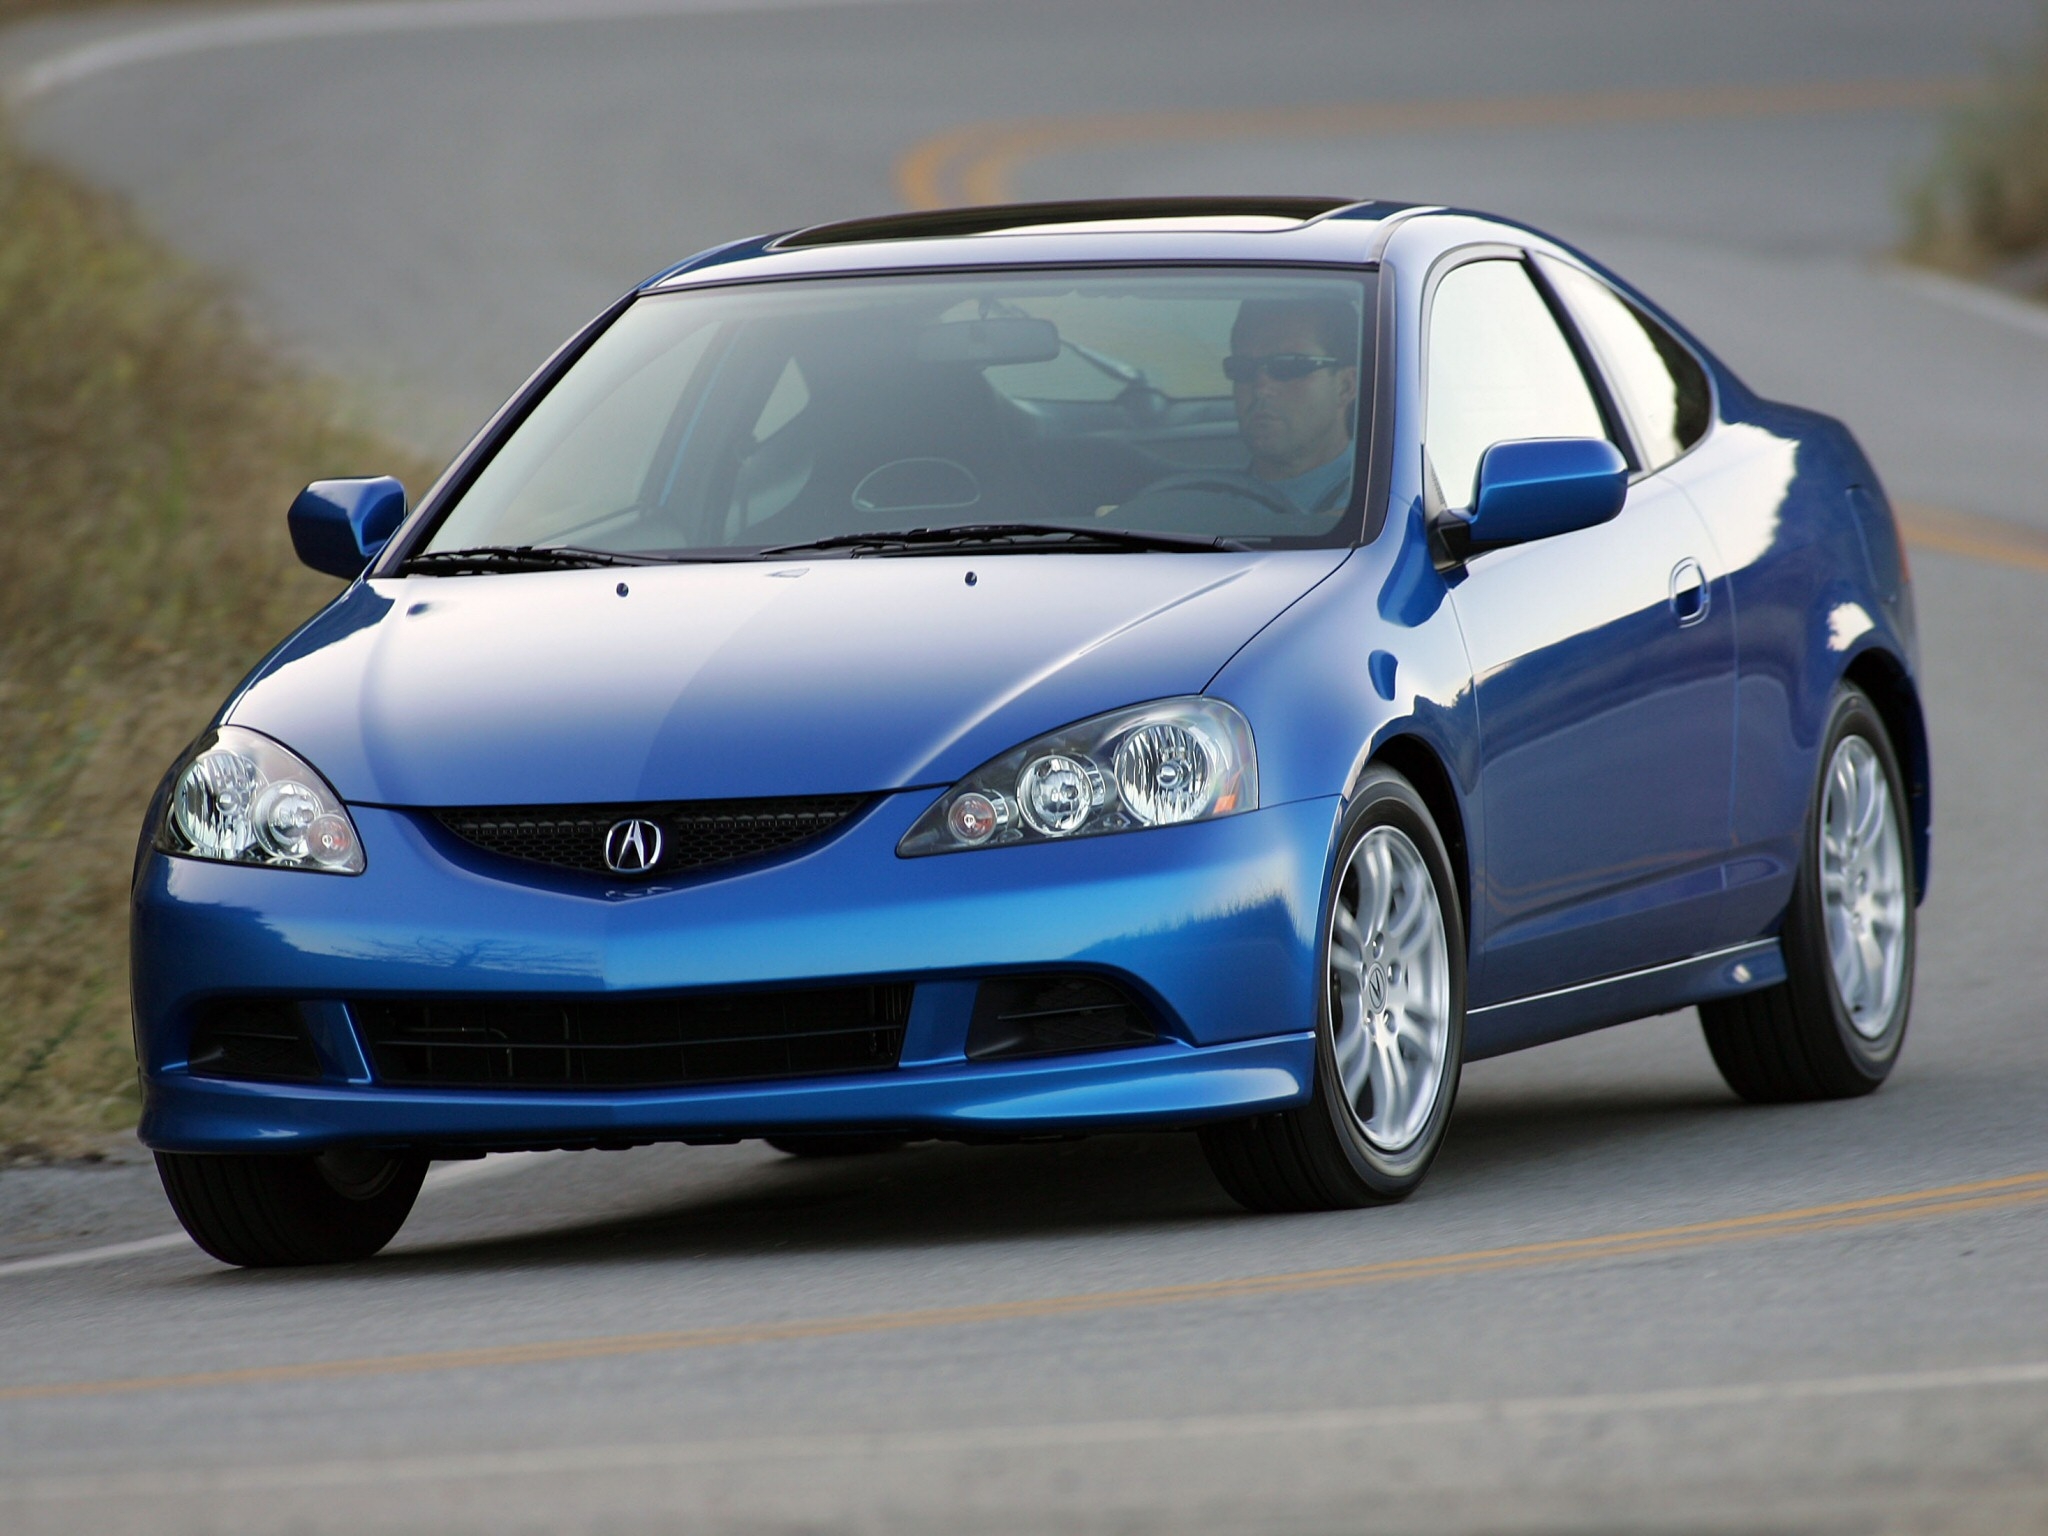 Full HD Wallpaper auto, acura, cars, blue, road, front view, style, rsx, 2005, akura